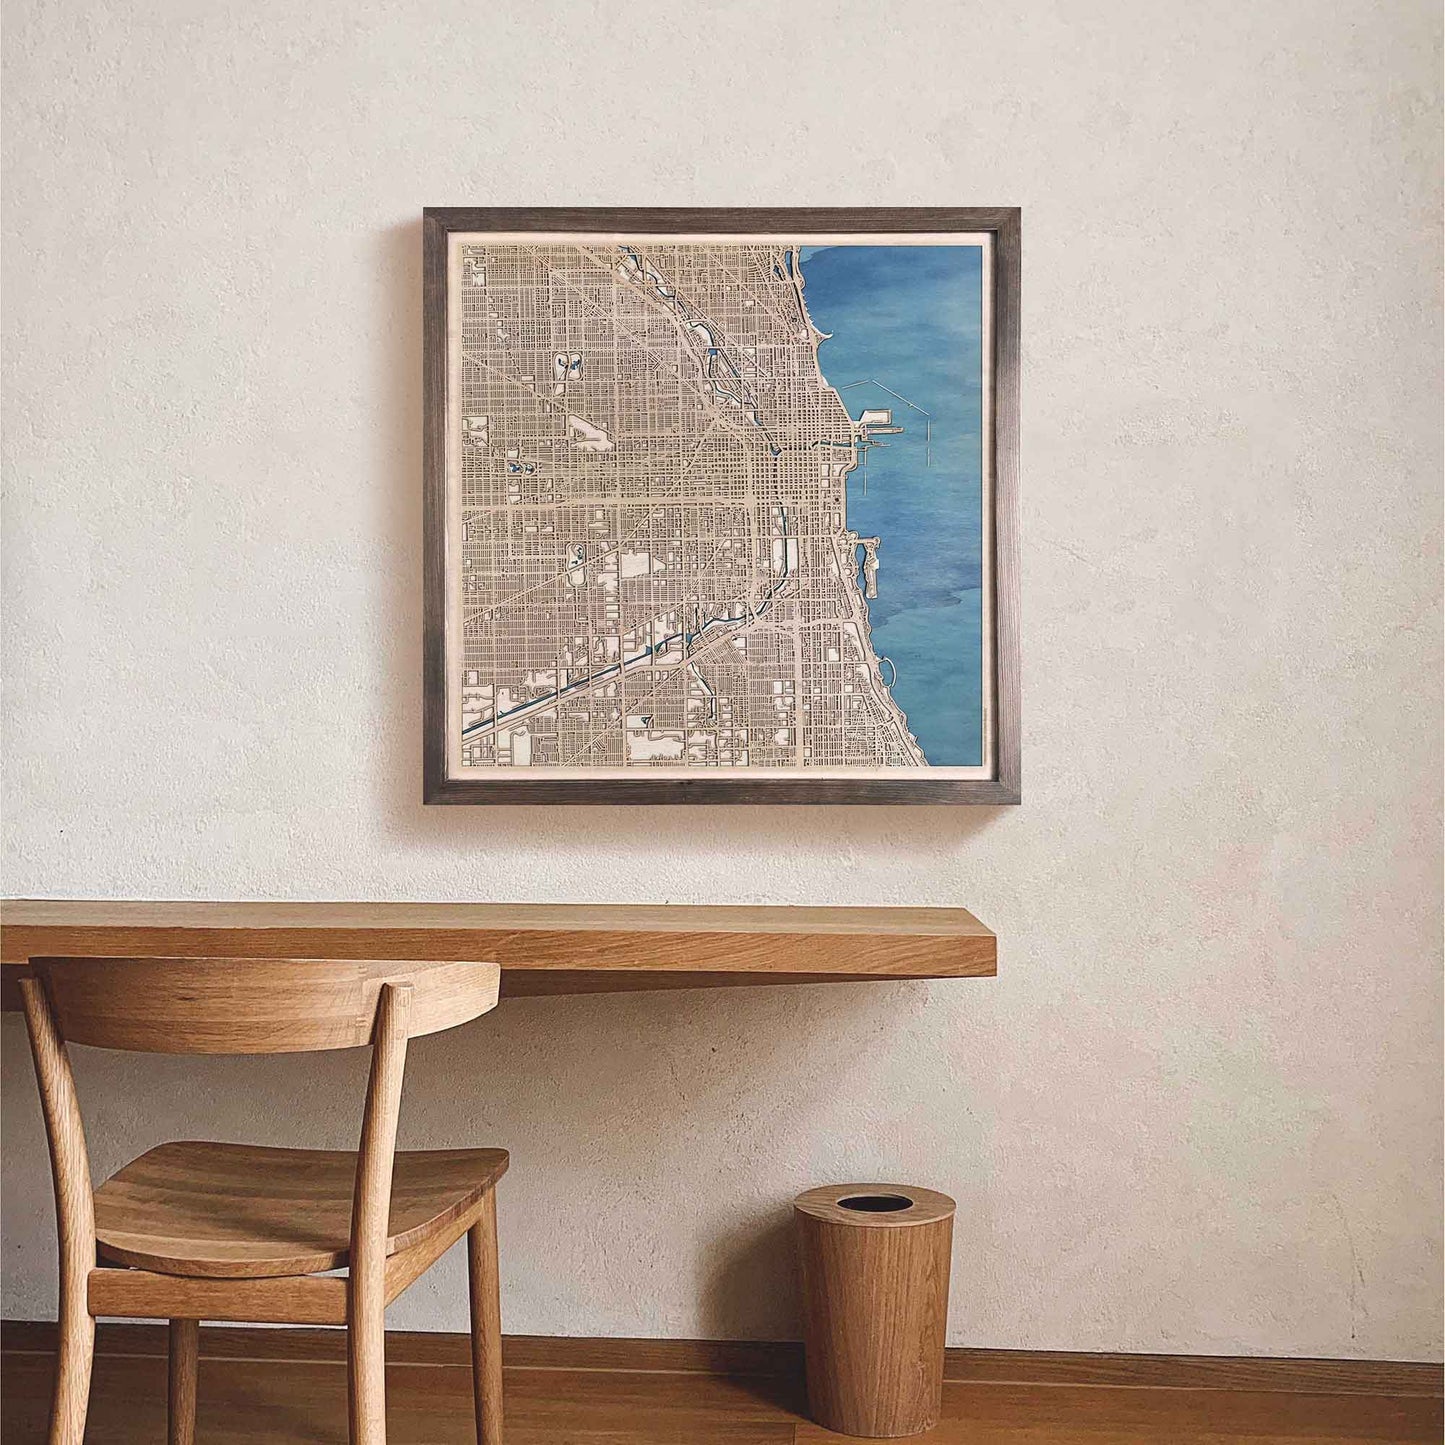 Chicago Wooden Map by CityWood - Custom Wood Map Art - Unique Laser Cut Engraved - Anniversary Gift